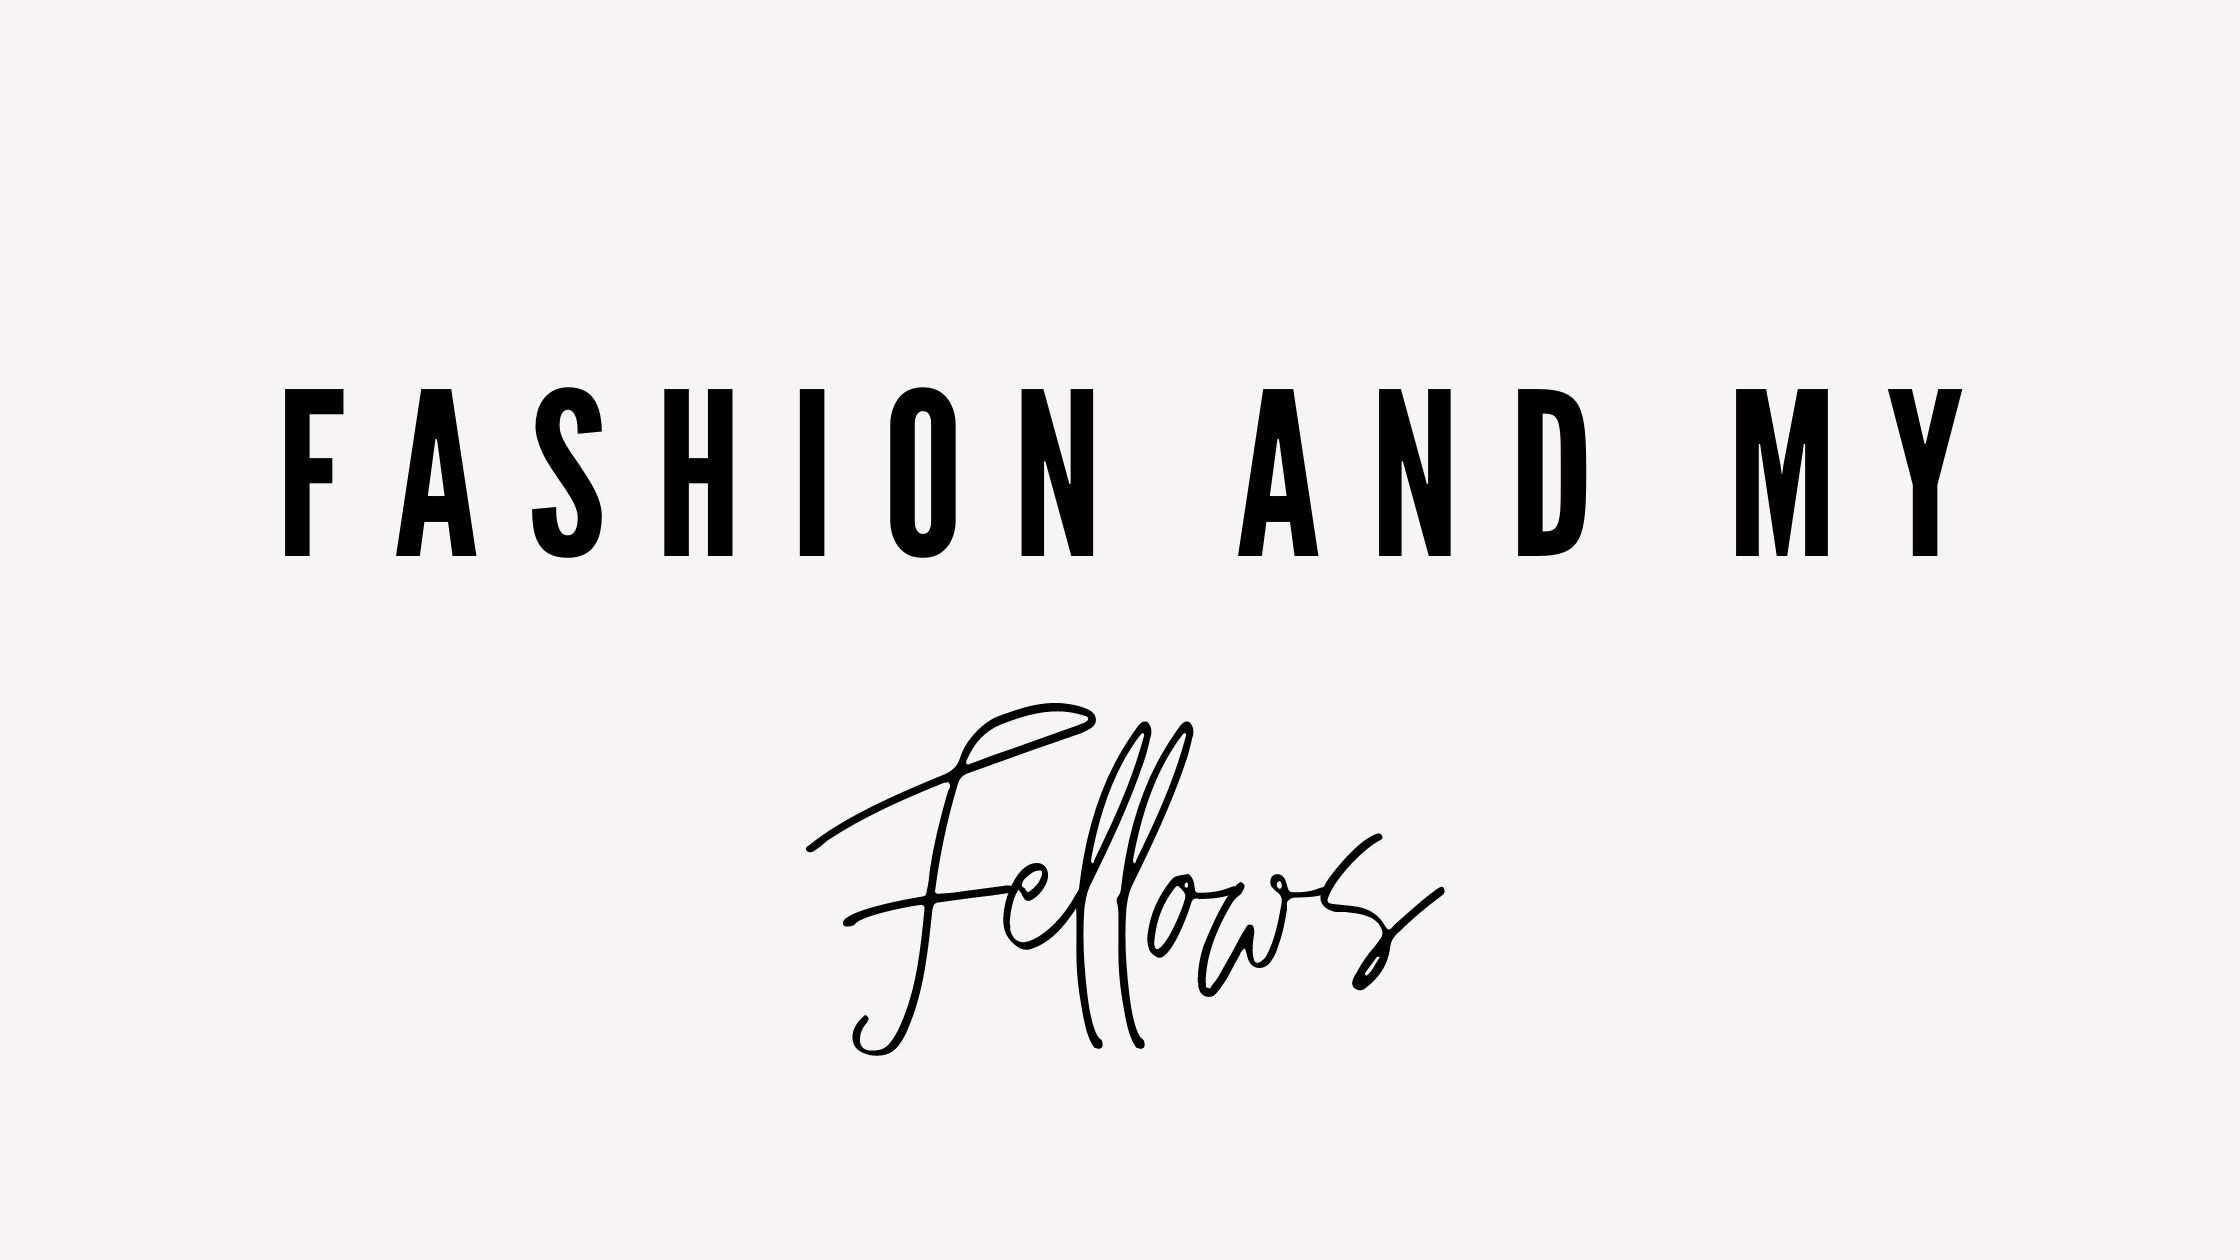 Fashion and my Fellows